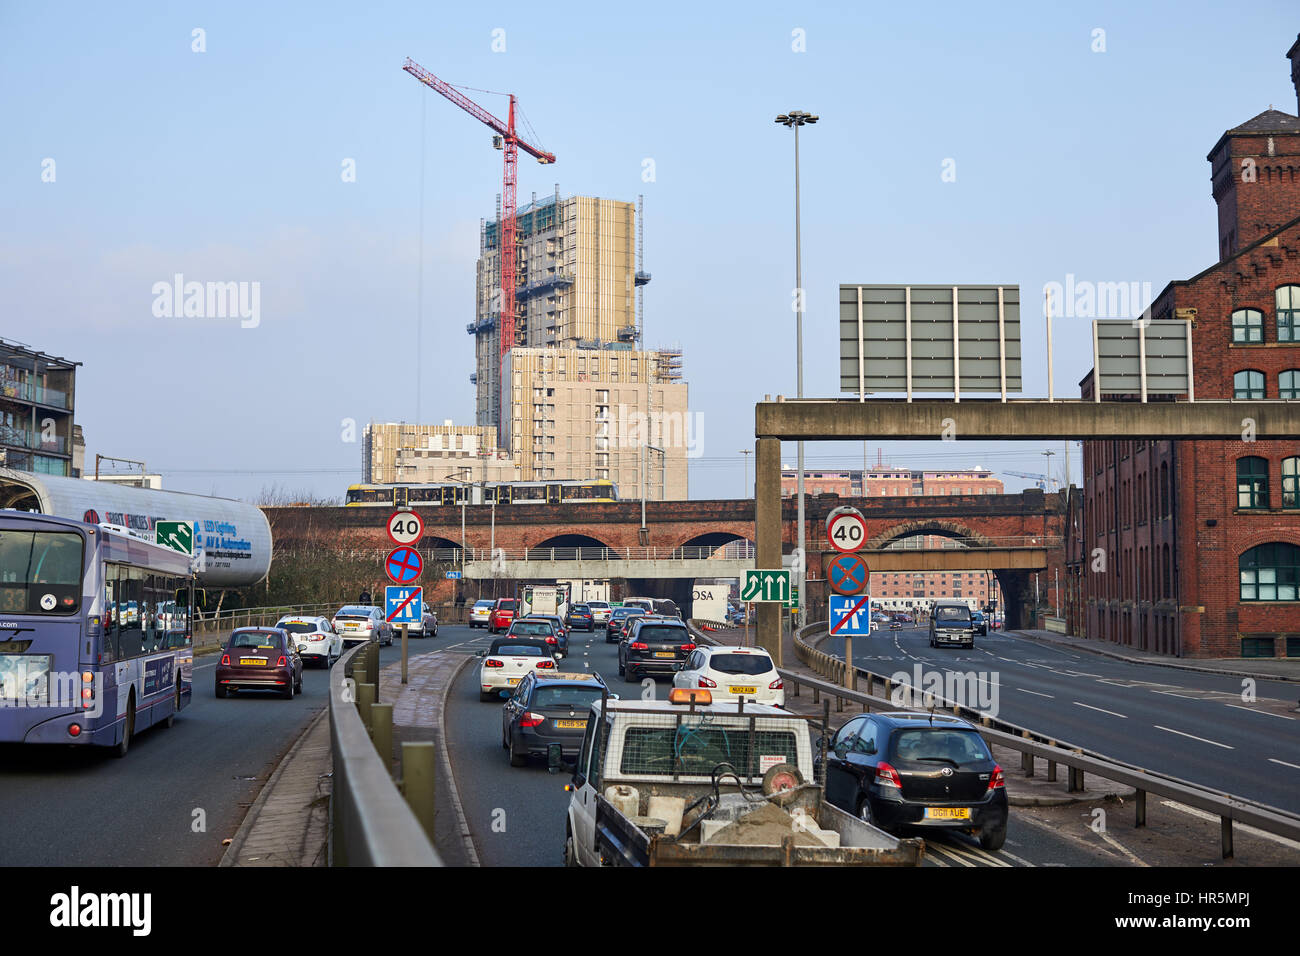 A yellow  Metrolink tram crossing a viaduct at  The Mancunian Way at  Castlefield Salford boundary Manchester England,UK Stock Photo